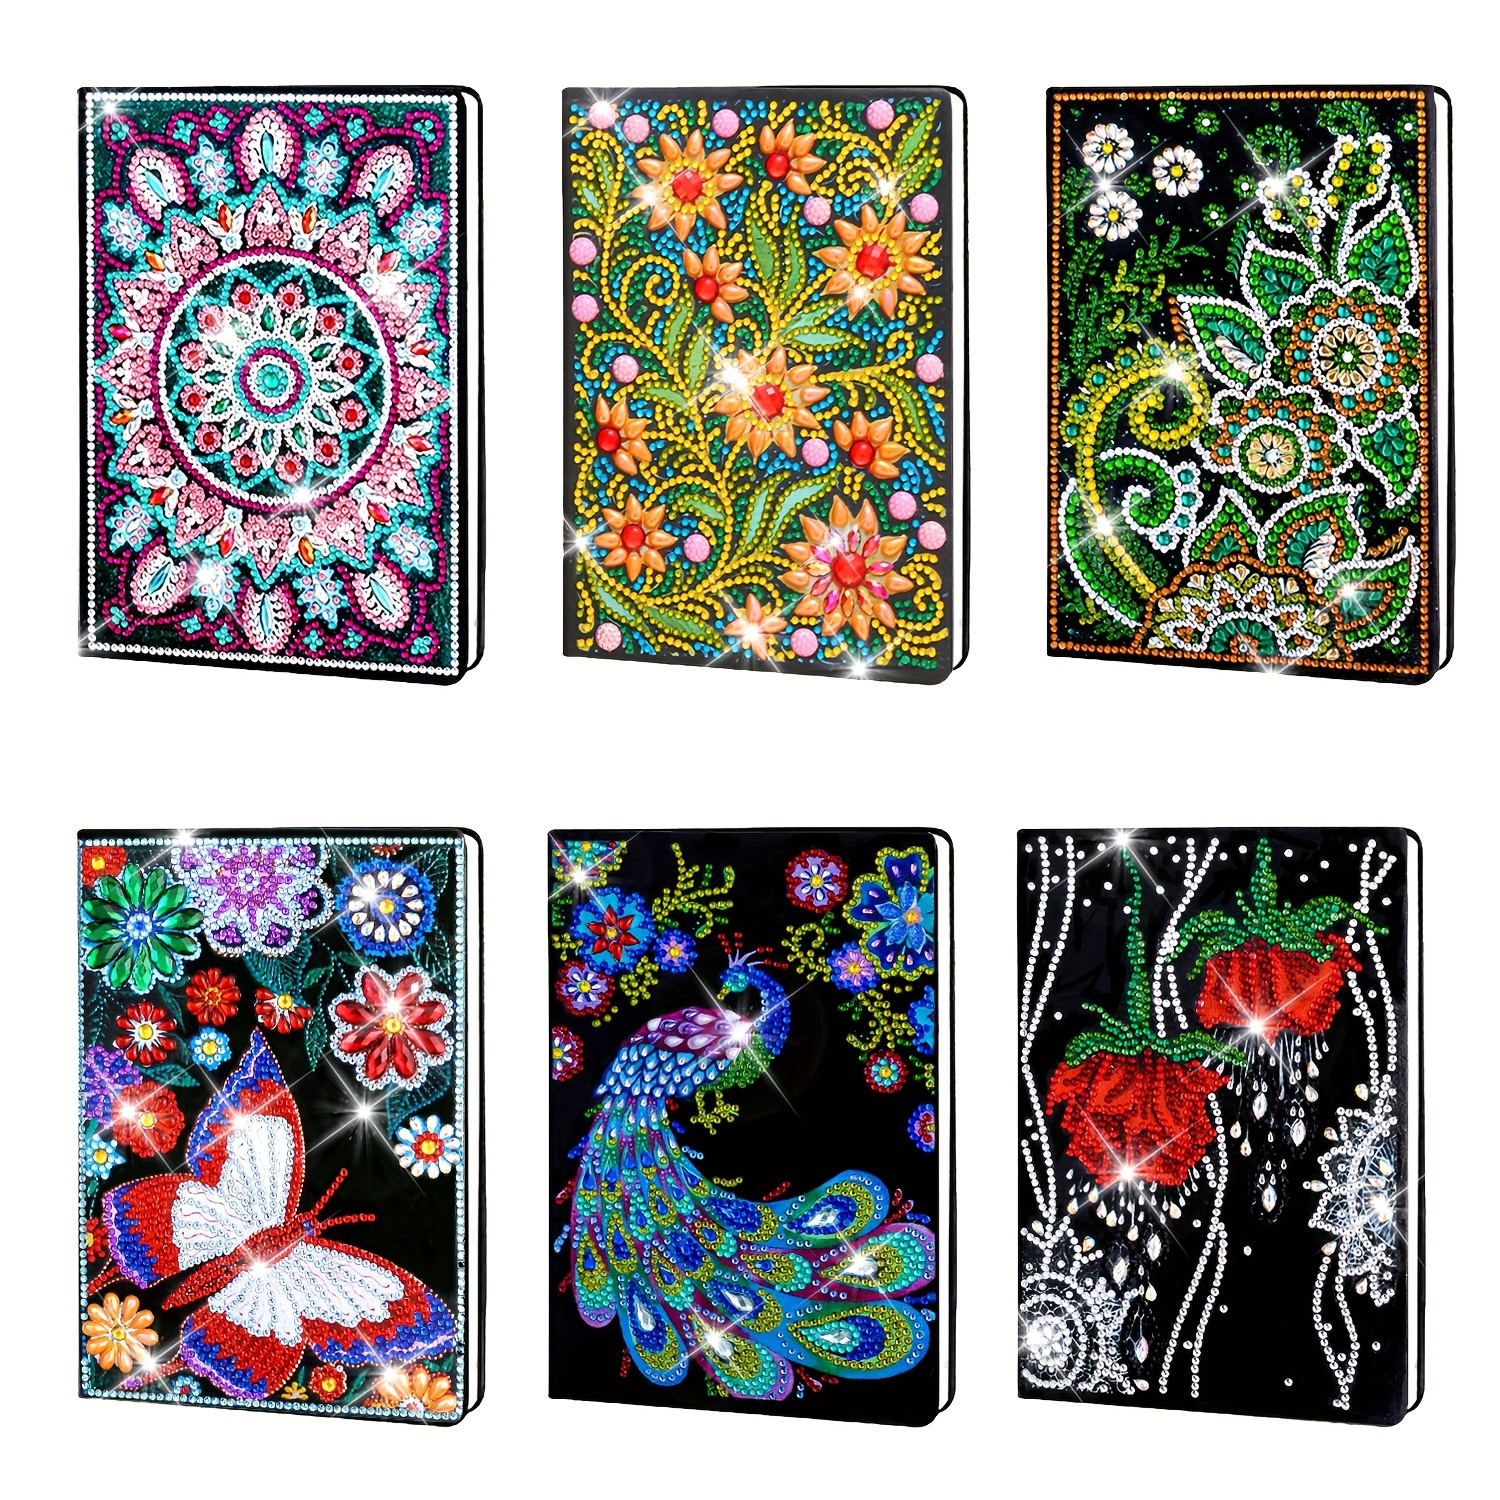 

New 5d Diamond Art Painting Notebook 5a Spring Summer Diamond Art Painting Kit Diy Colorful Rose Flower Mandala Flower Journal Notebook Sketchbook With Learning Home Office Art Painting